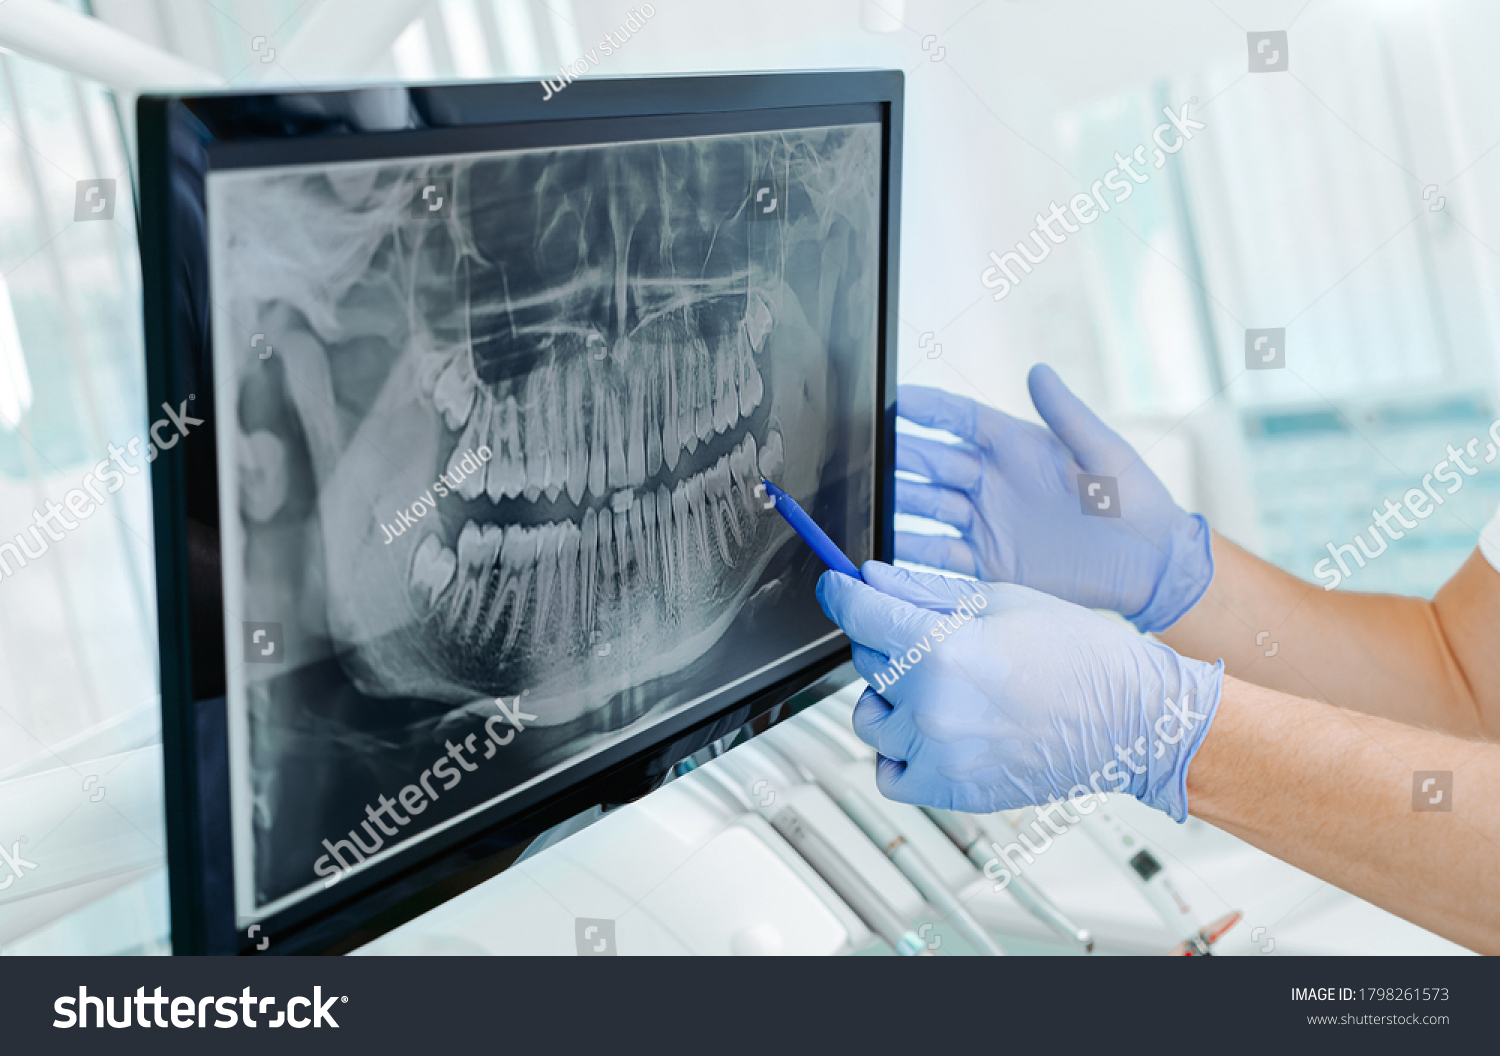 Hands doctor dentist in gloves show the teeth on x-ray on digital screen in dental clinic on light background with medical equipment. Smile healthy teeth concept, close up #1798261573